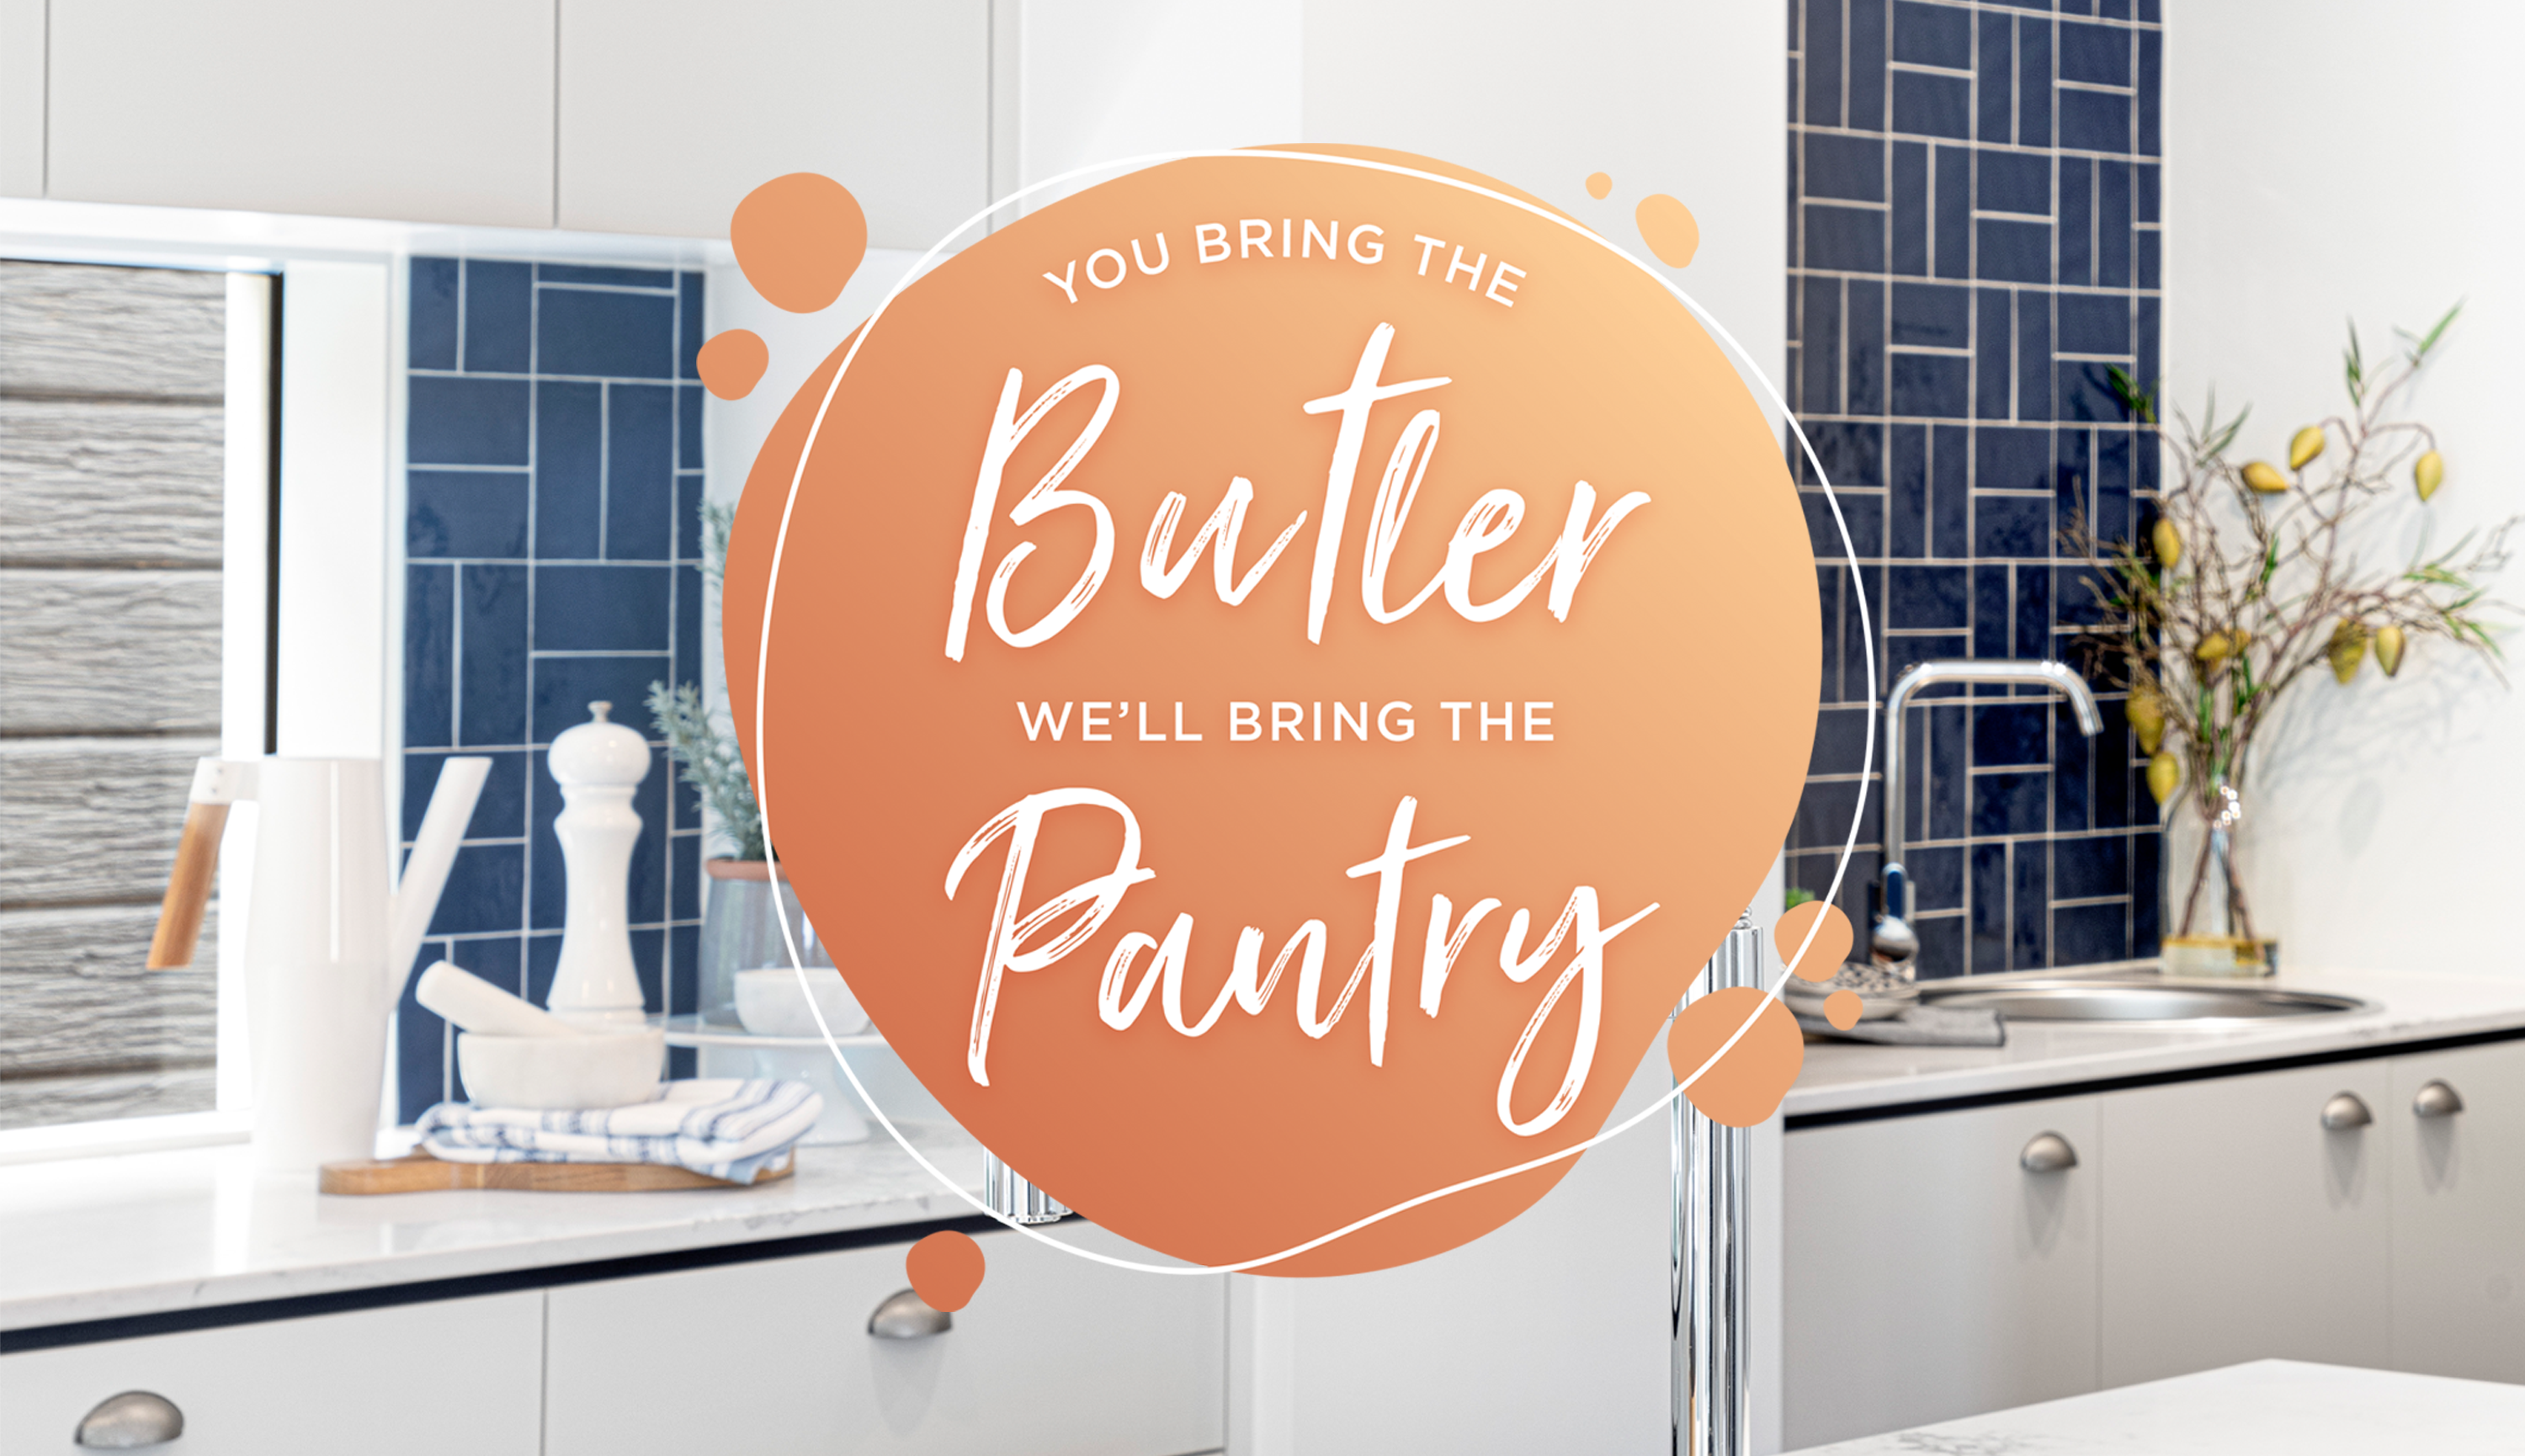 Bring the Butler - Landing Page Banner